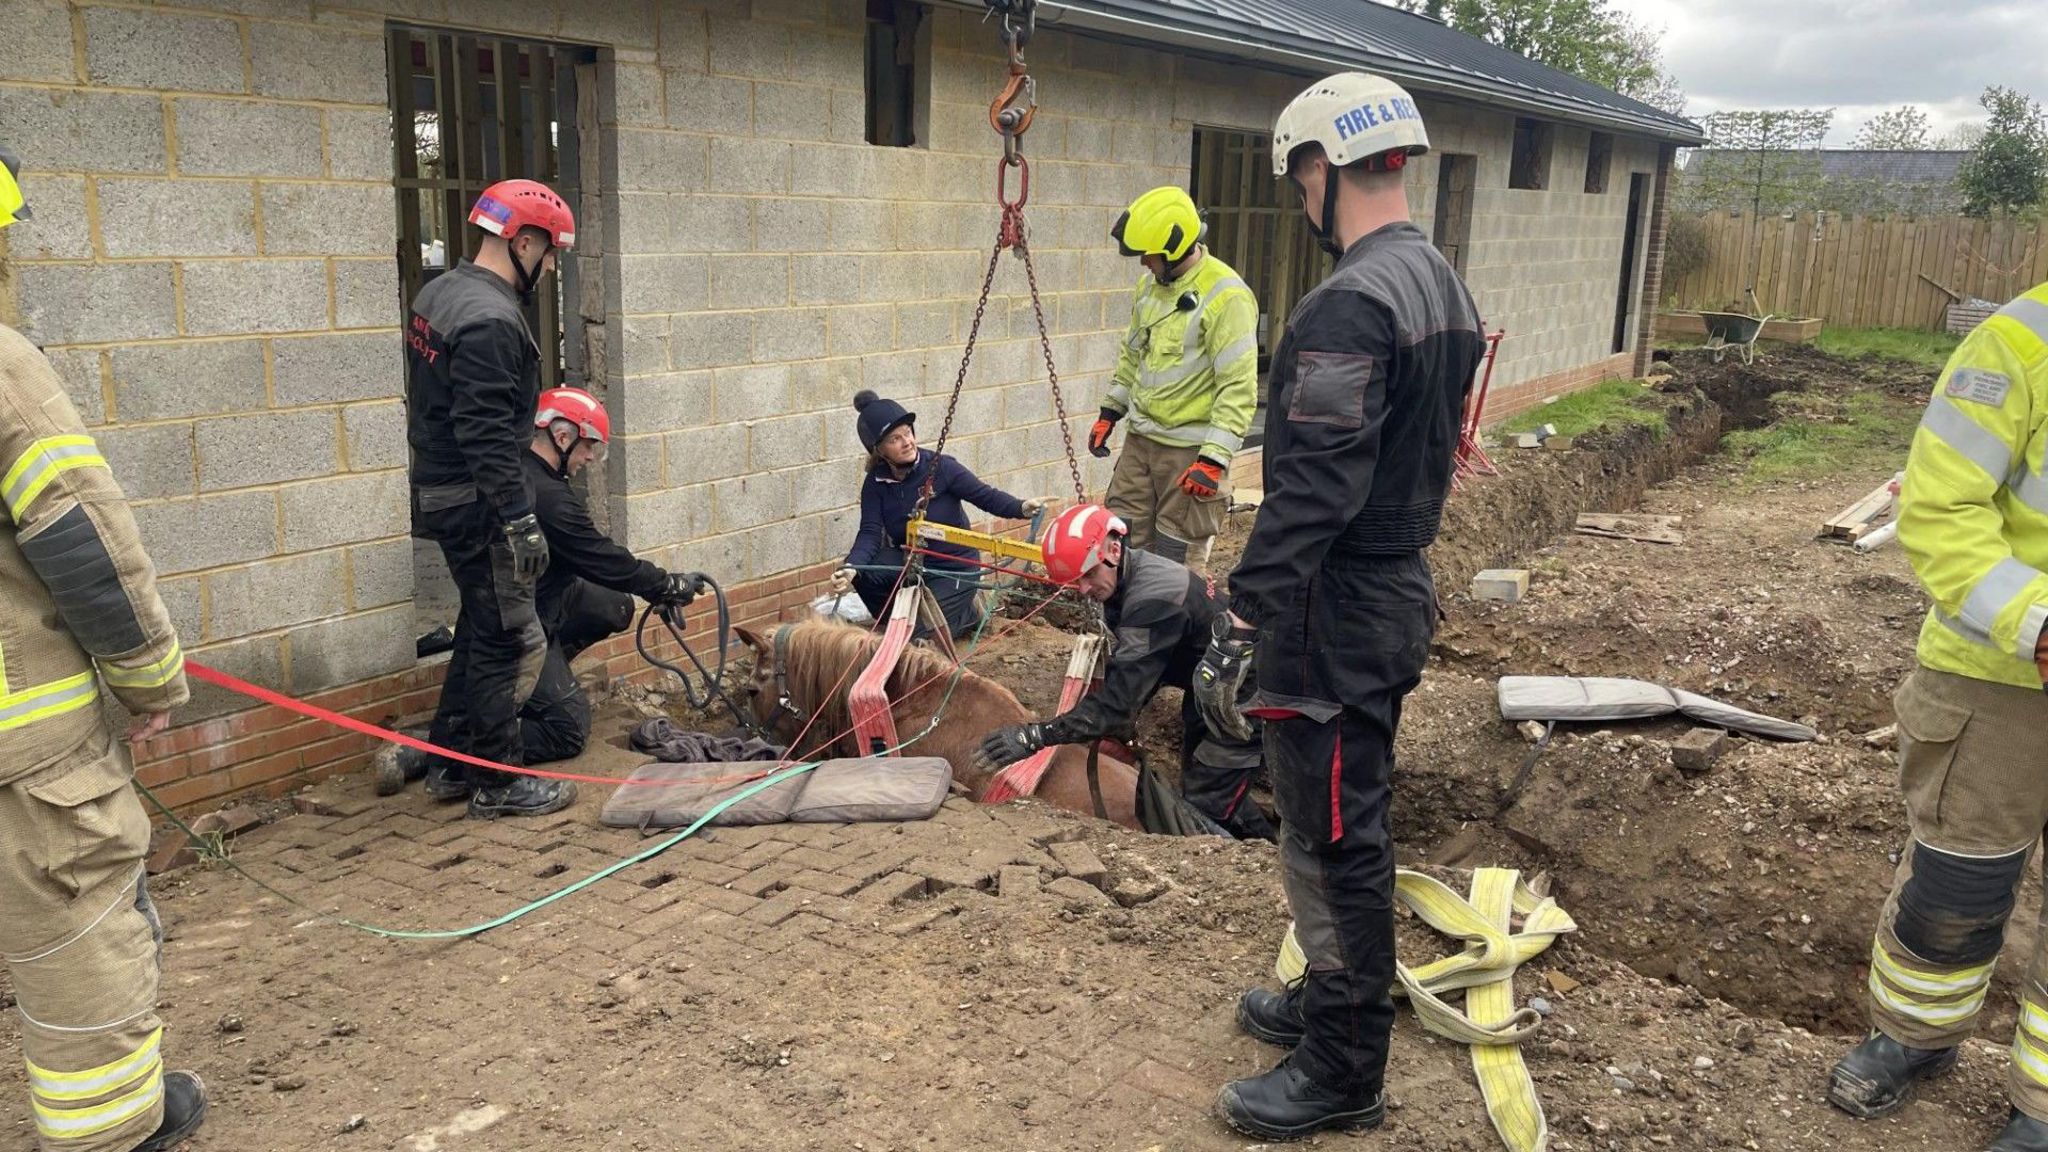 Crews attending an animal rescue in Marlow